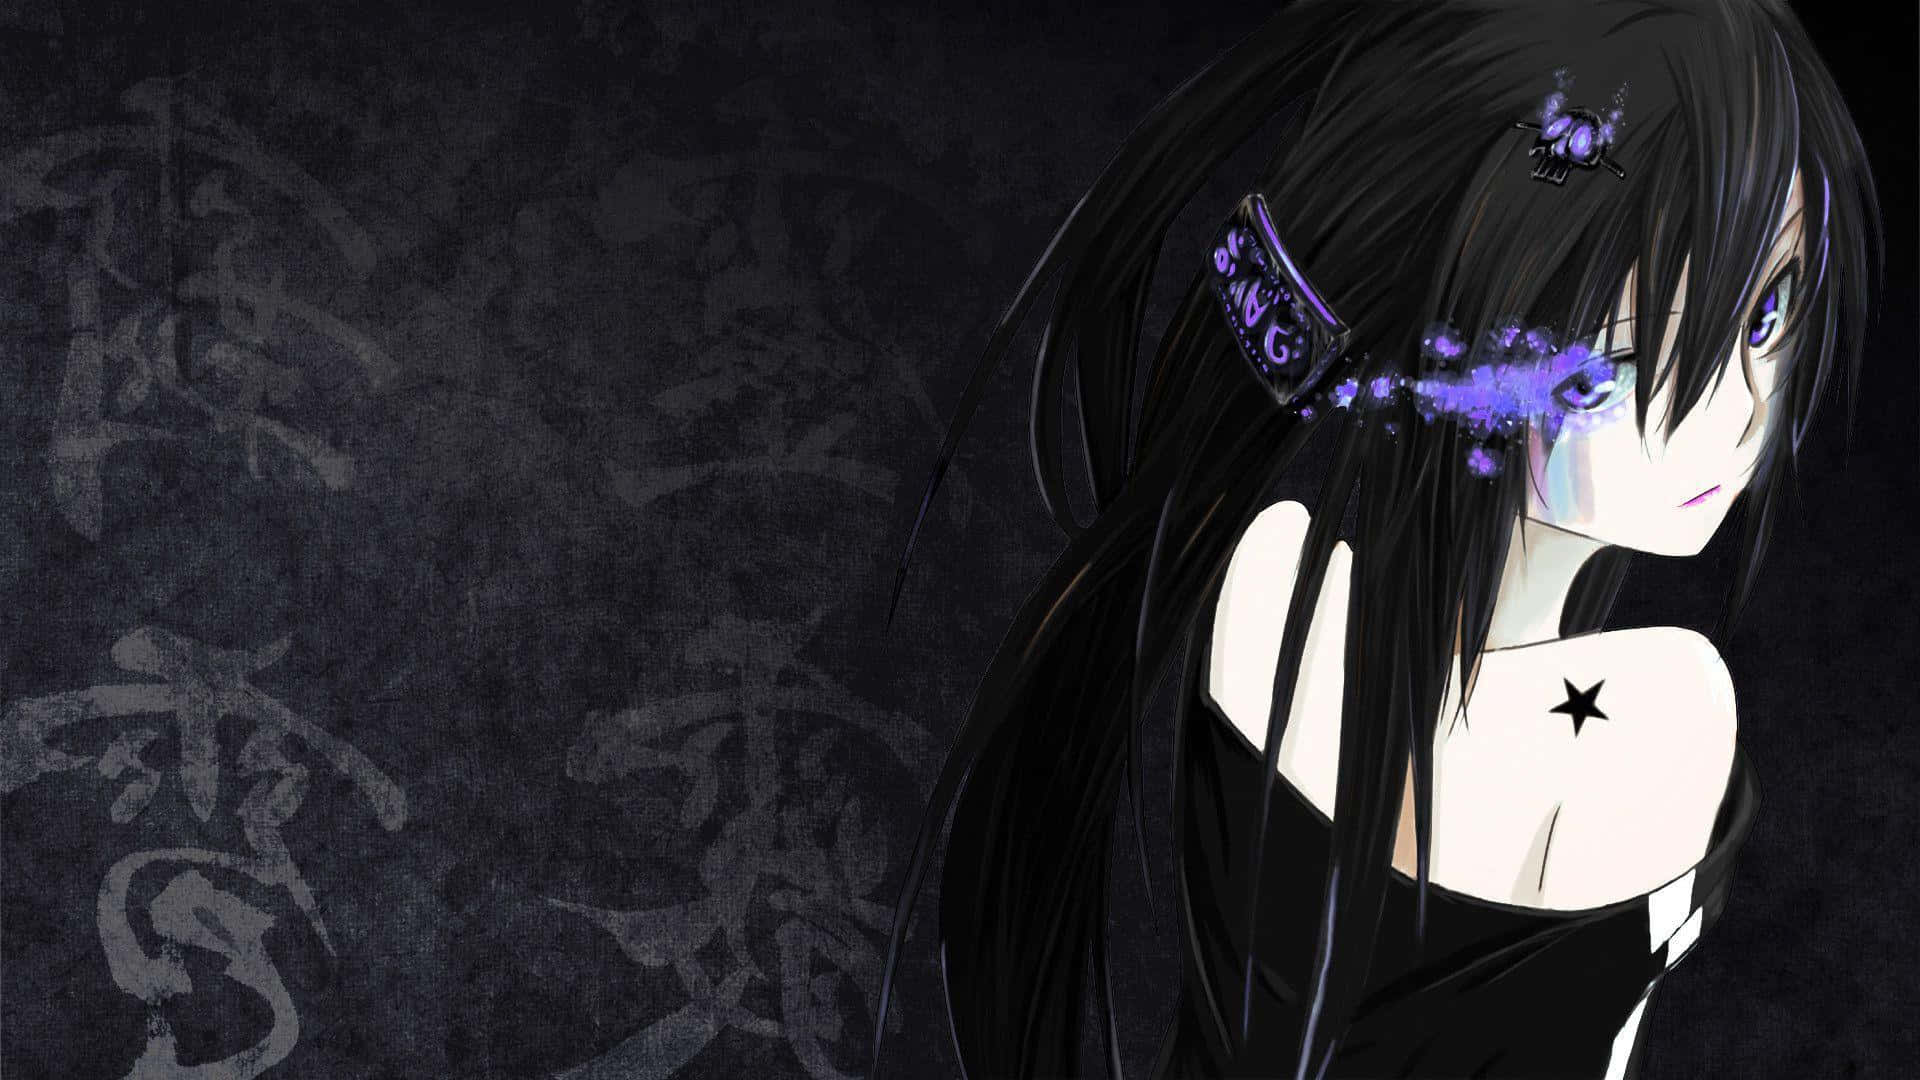 Mysterious Anime Girl With Stylish Black Hair Wallpaper